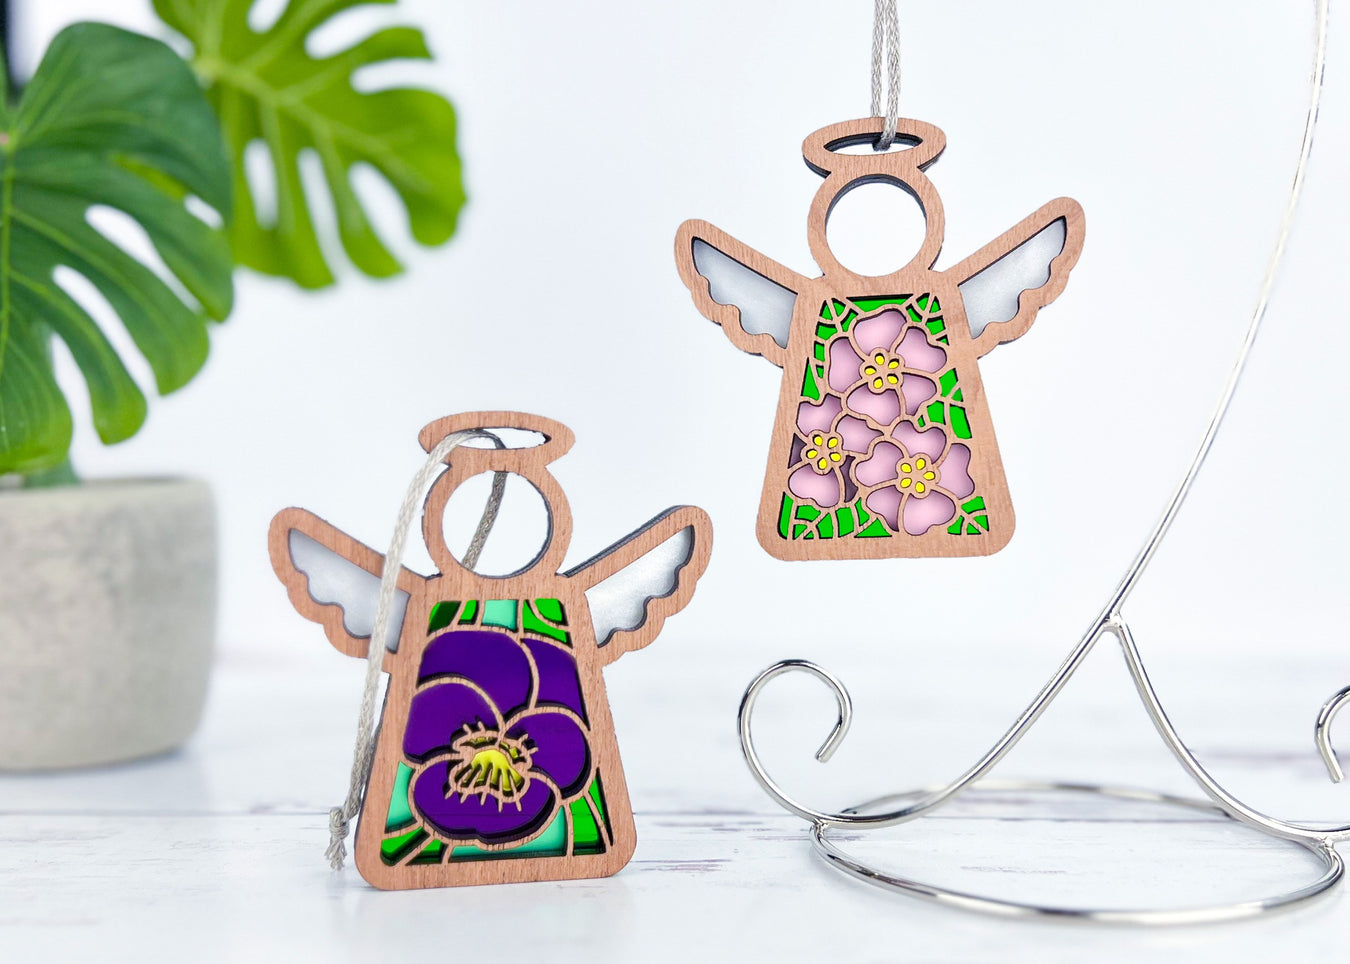 Angel ornaments featuring February birth month flowers, ideal birthday gift ideas for a wife, best friend or special women, showcasing vibrant primrose and violet birth flowers in a stained glass inspired style.